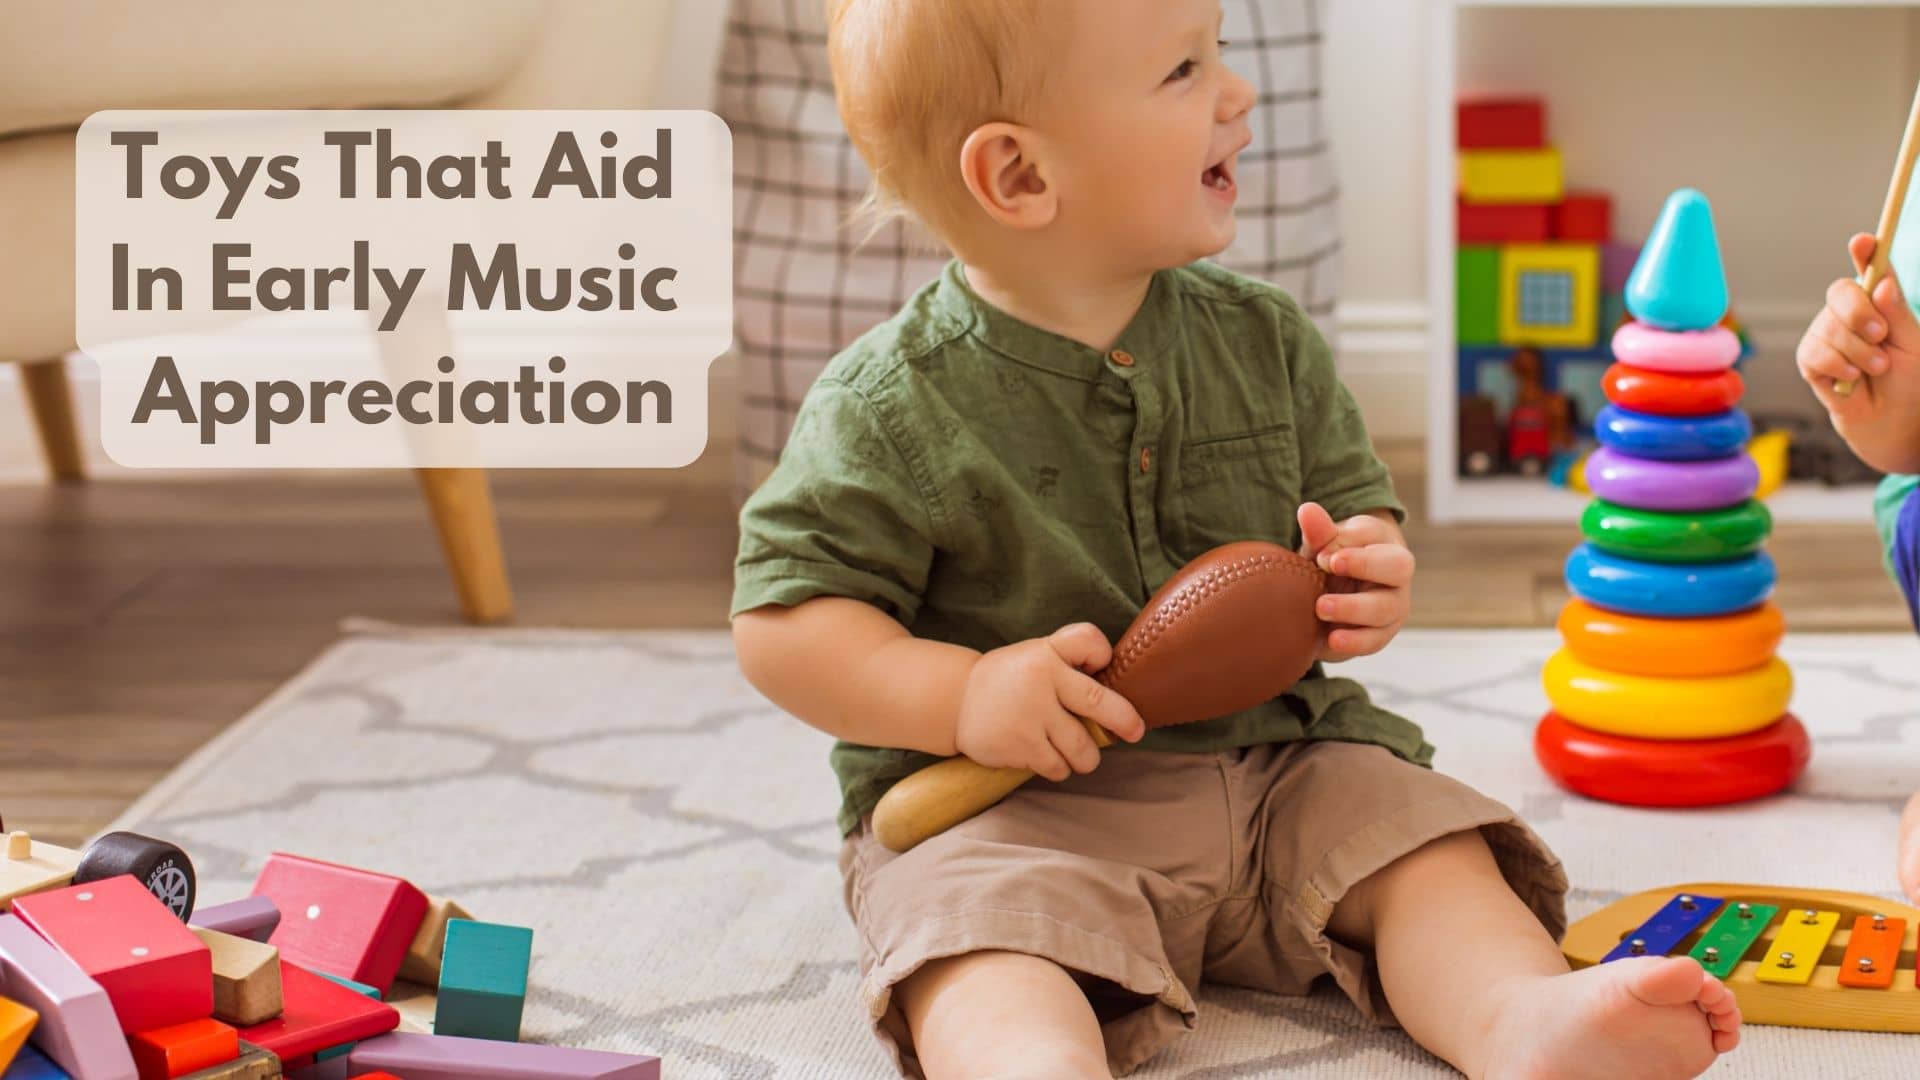 What Toys Aid In Early Music Appreciation?